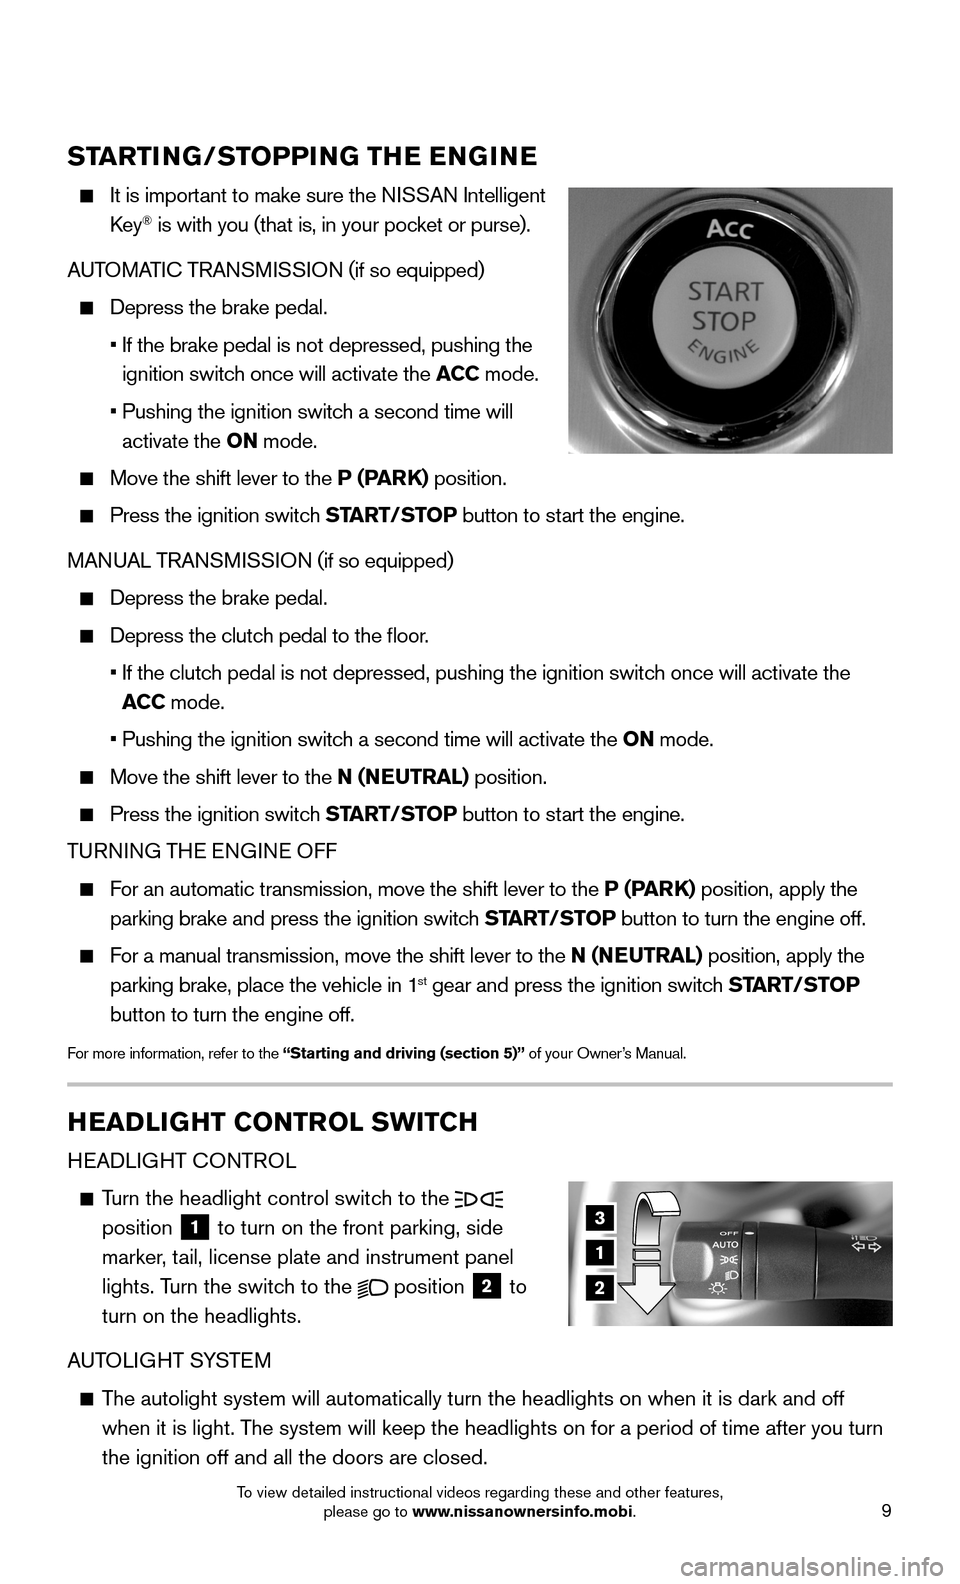 NISSAN 370Z COUPE 2015 Z34 Quick Reference Guide 9
STARTING/STOPPING THE ENGINE
    It is important to make sure the NISSAN Intelligent 
Key® is with you (that is, in your pocket or purse).
AUTOMATIC TRANSMISSION (if so equipped)
  Depress the brak